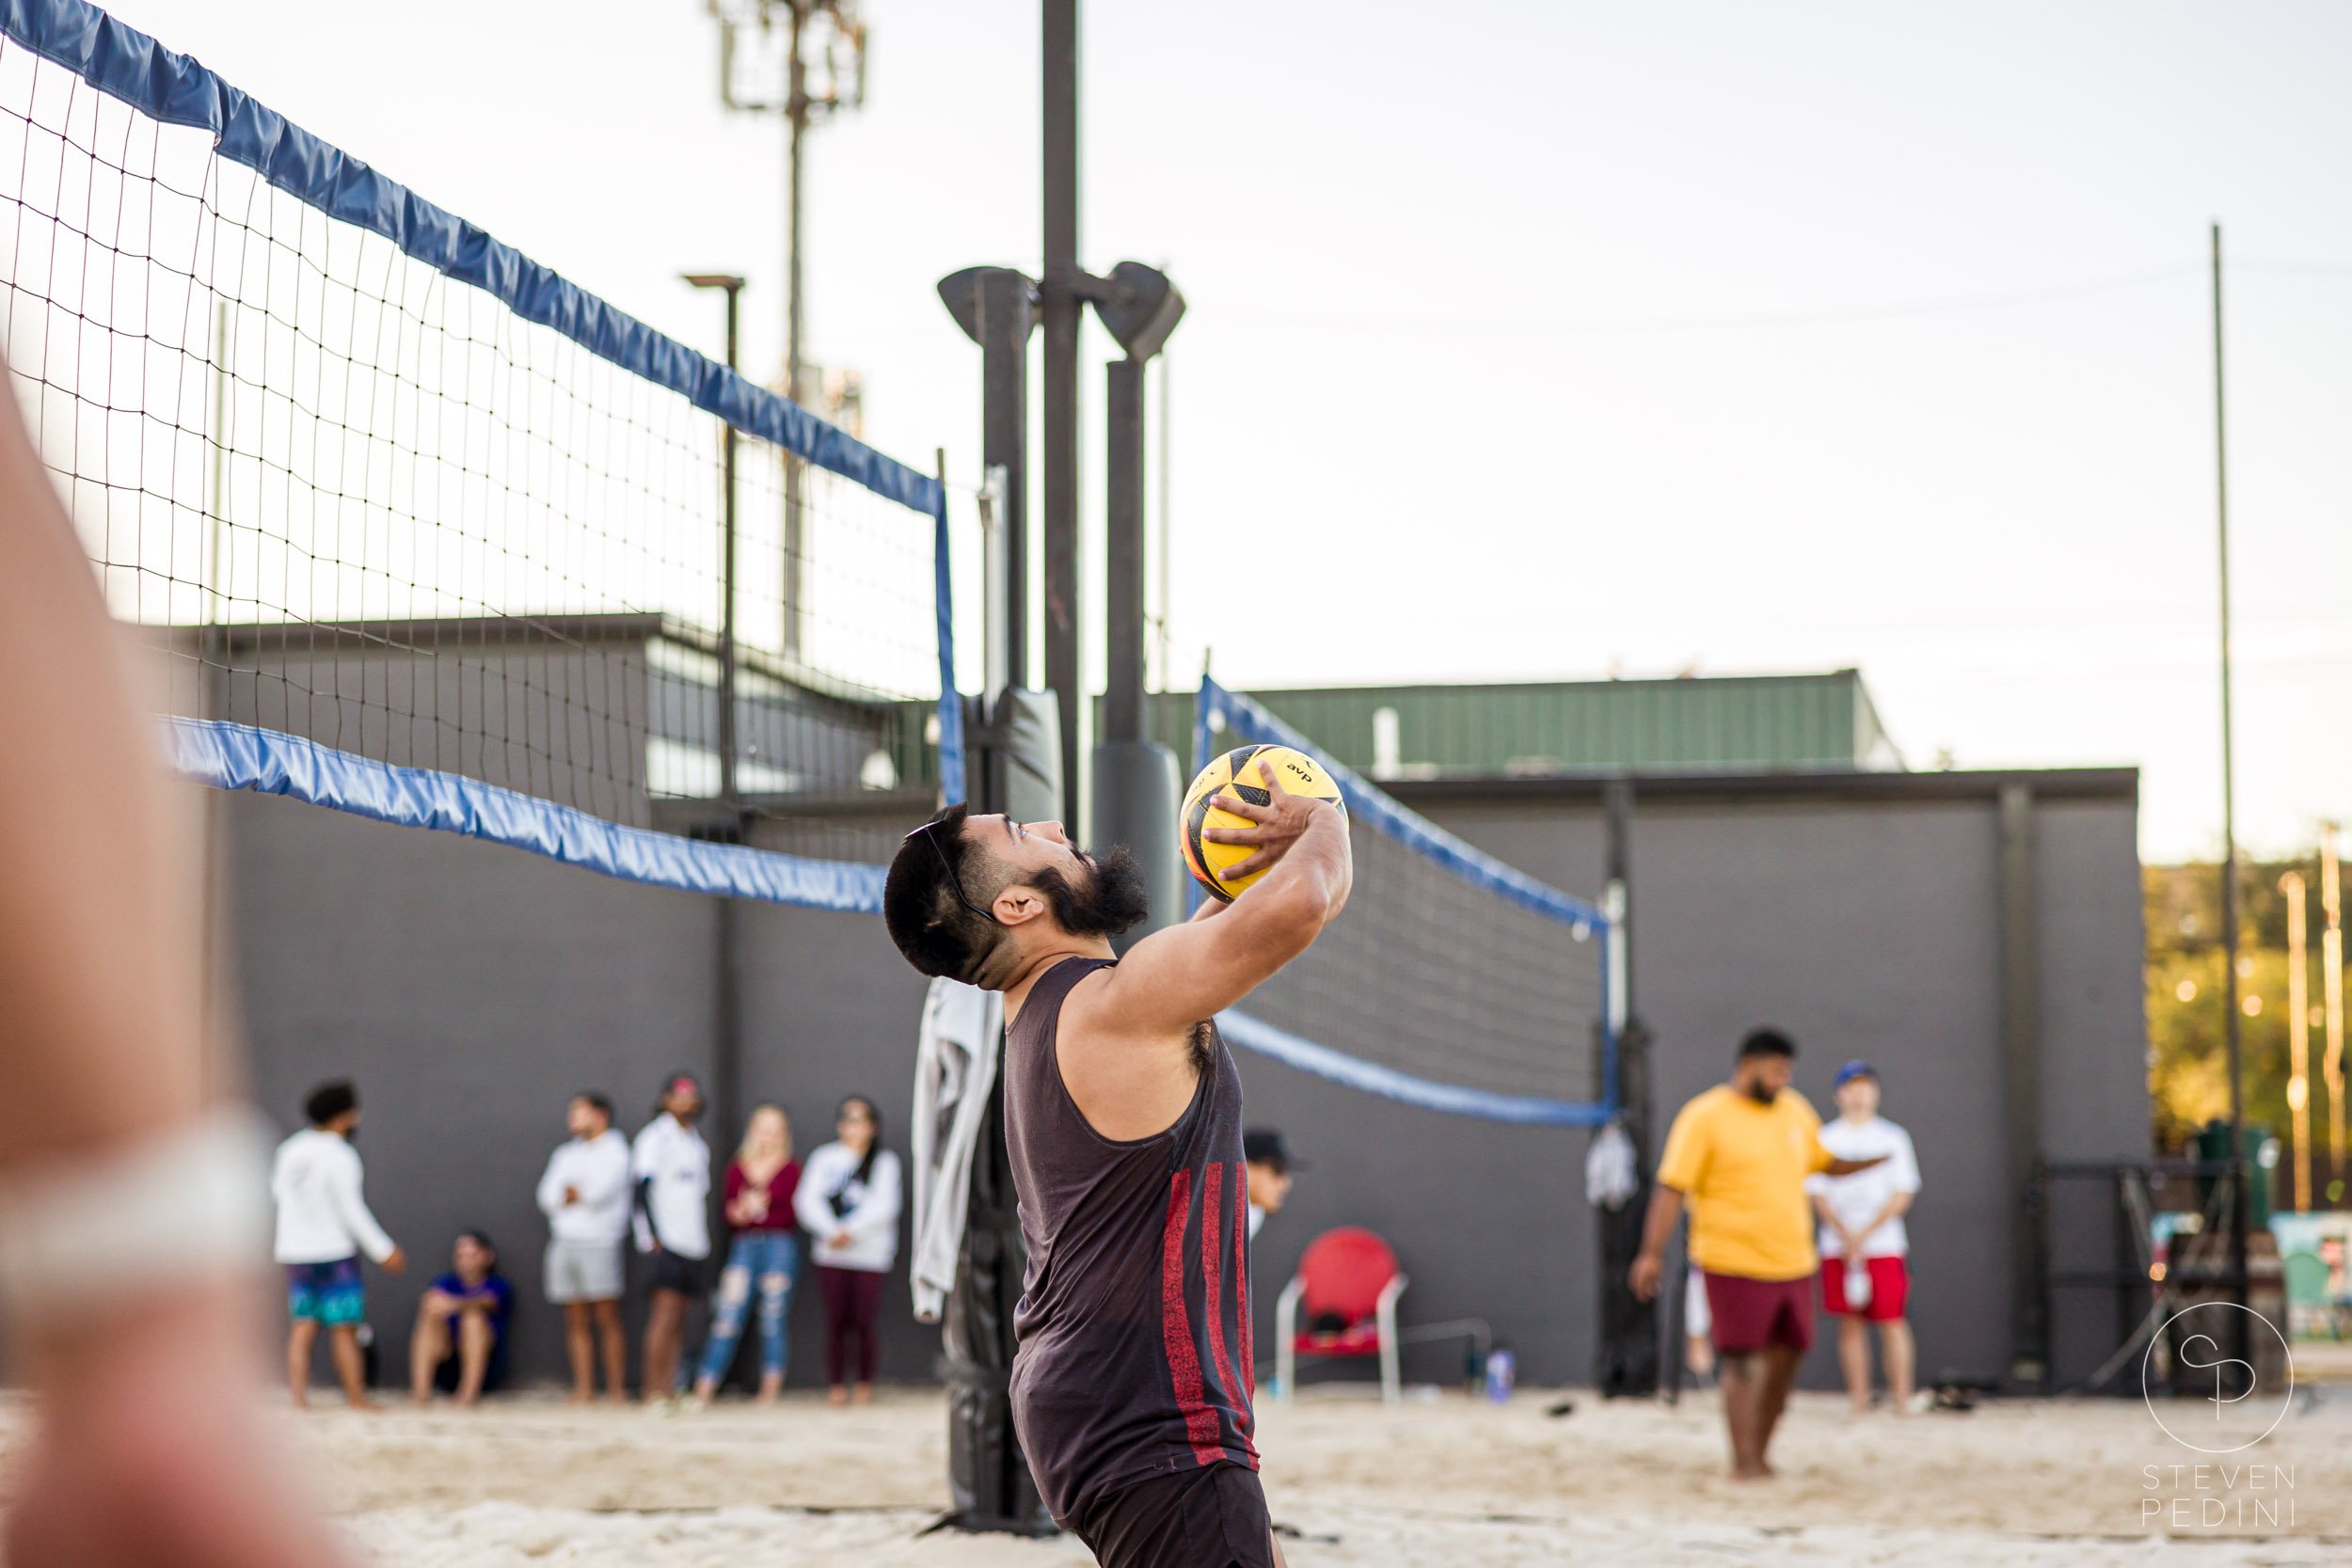 Steven Pedini Photography - Bumpy Pickle - Sand Volleyball - Houston TX - World Cup of Volleyball - 00179.jpg